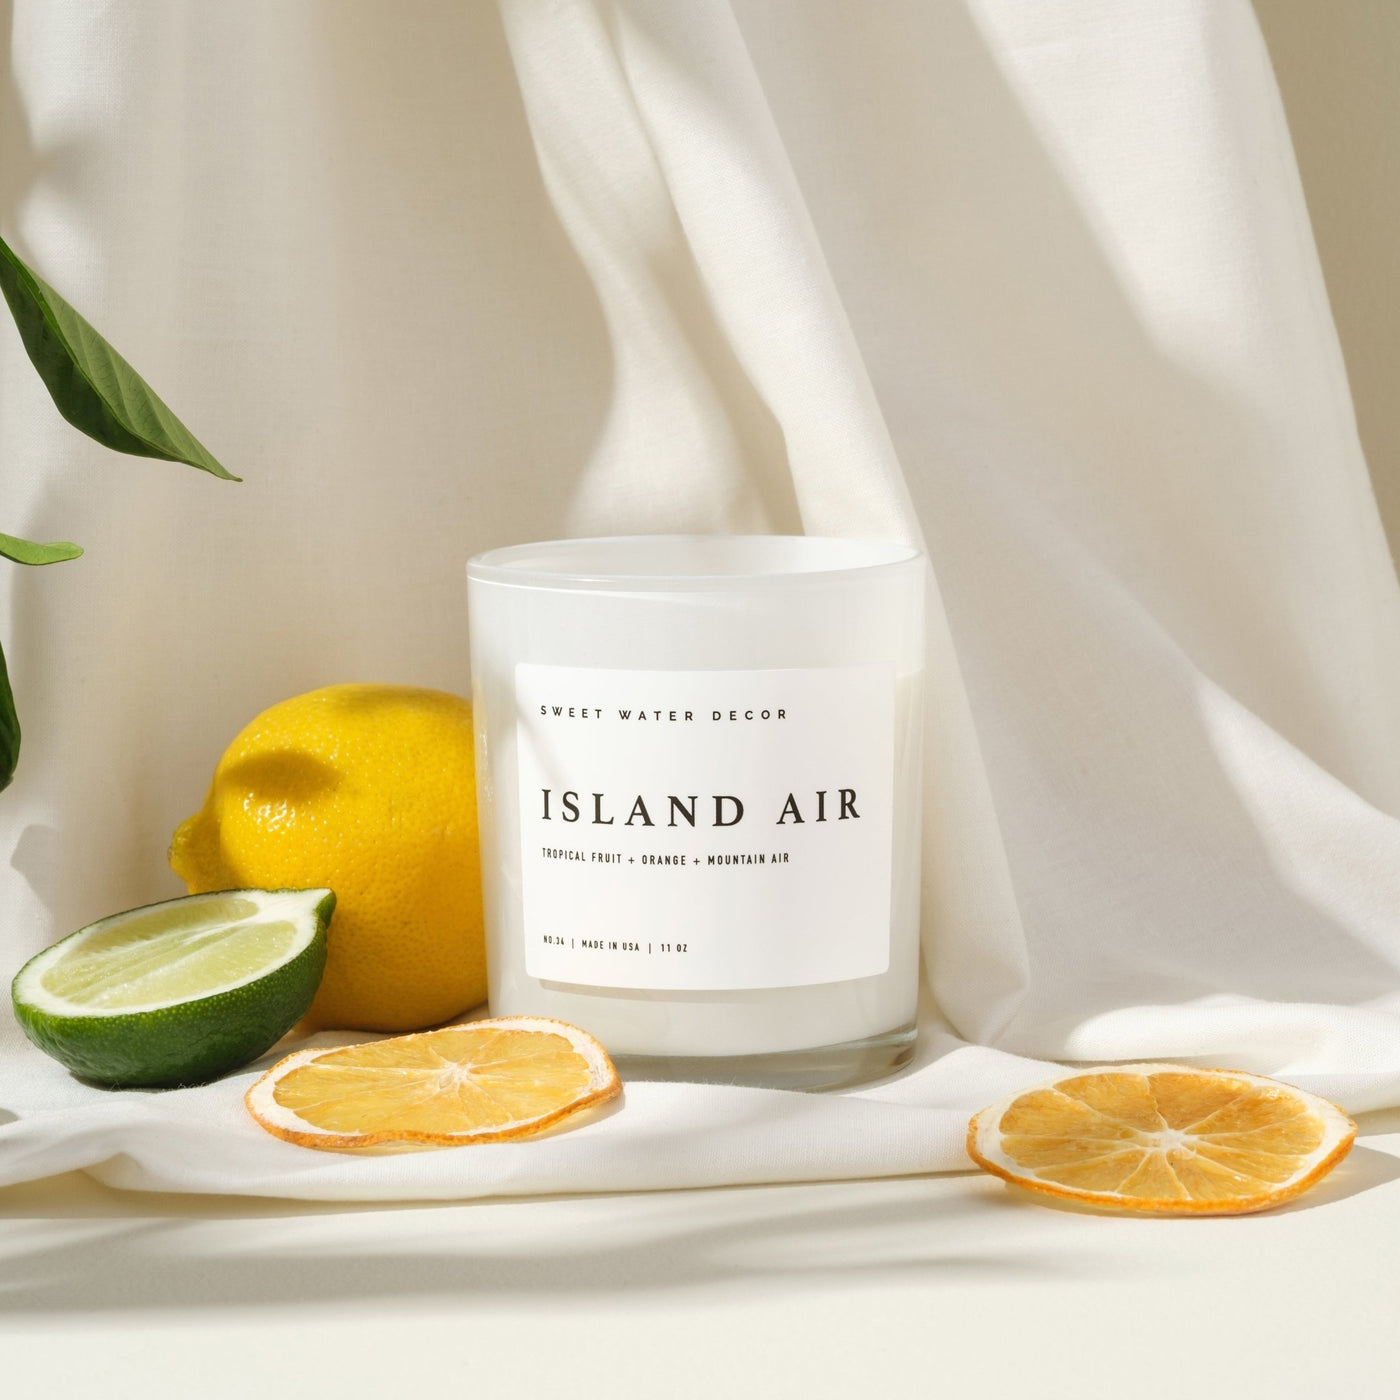 Island Air Soy Candle - White Jar - 11 oz - Sweet Water Decor - Candles